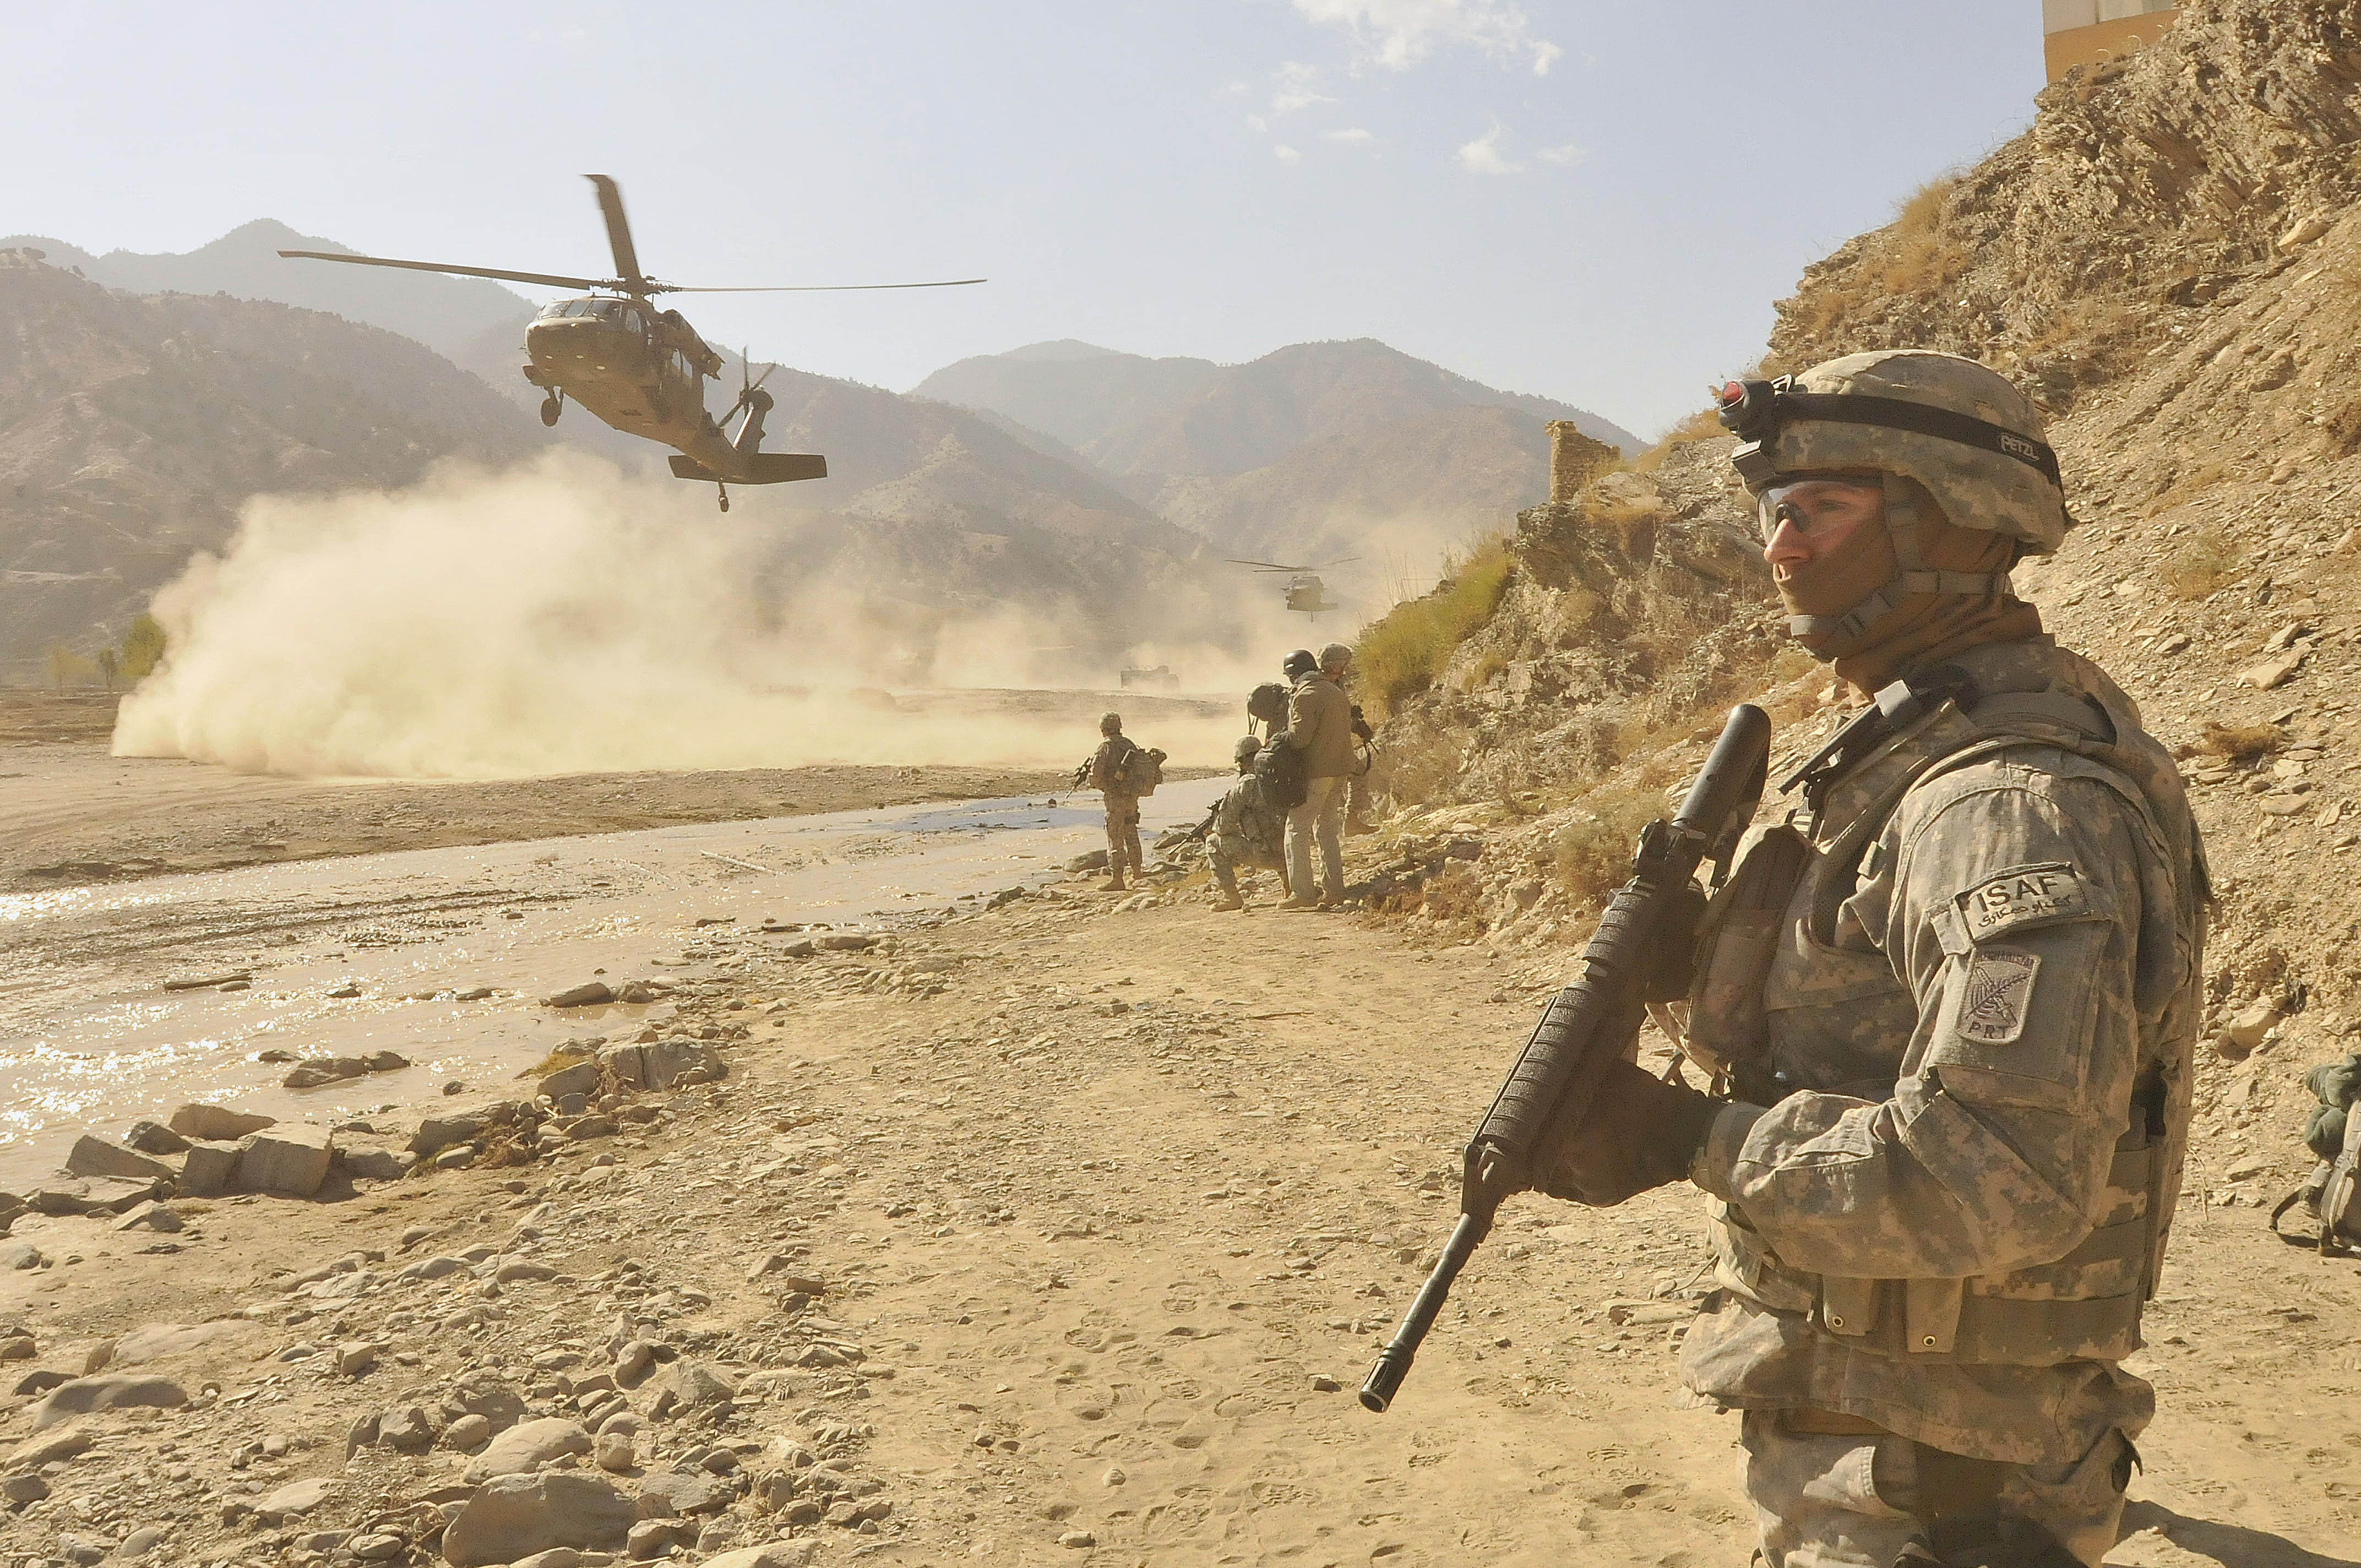 OPINION: We are no longer “at war” in Afghanistan